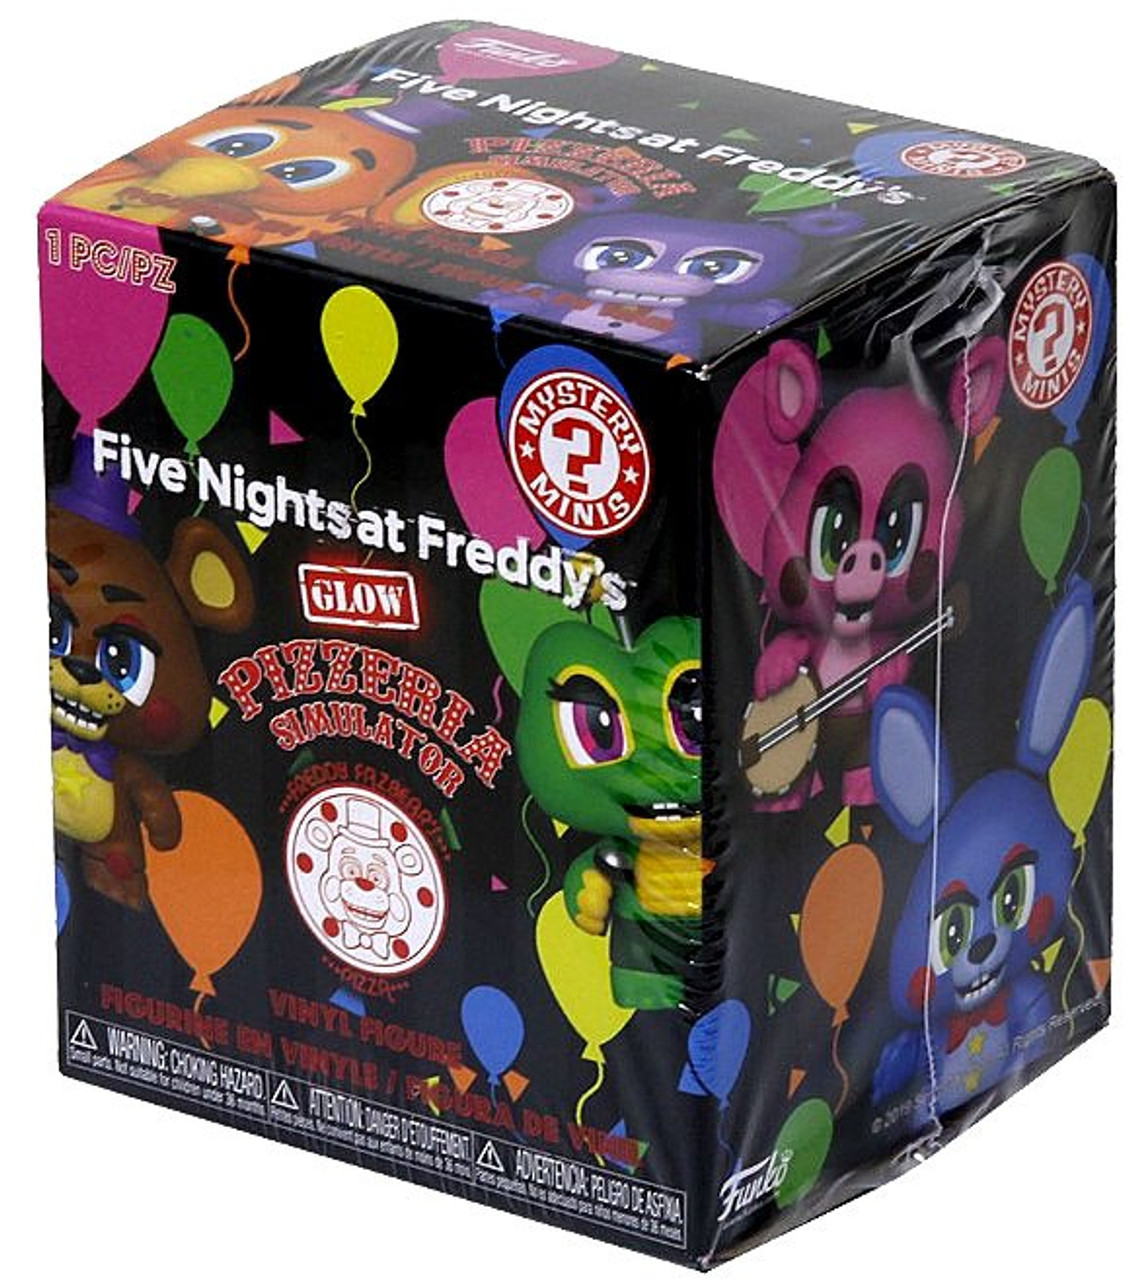 NEW Funko Five Nights at Freddy's GLOW IN THE DARK Mystery Minis NEW SEALED BOX!